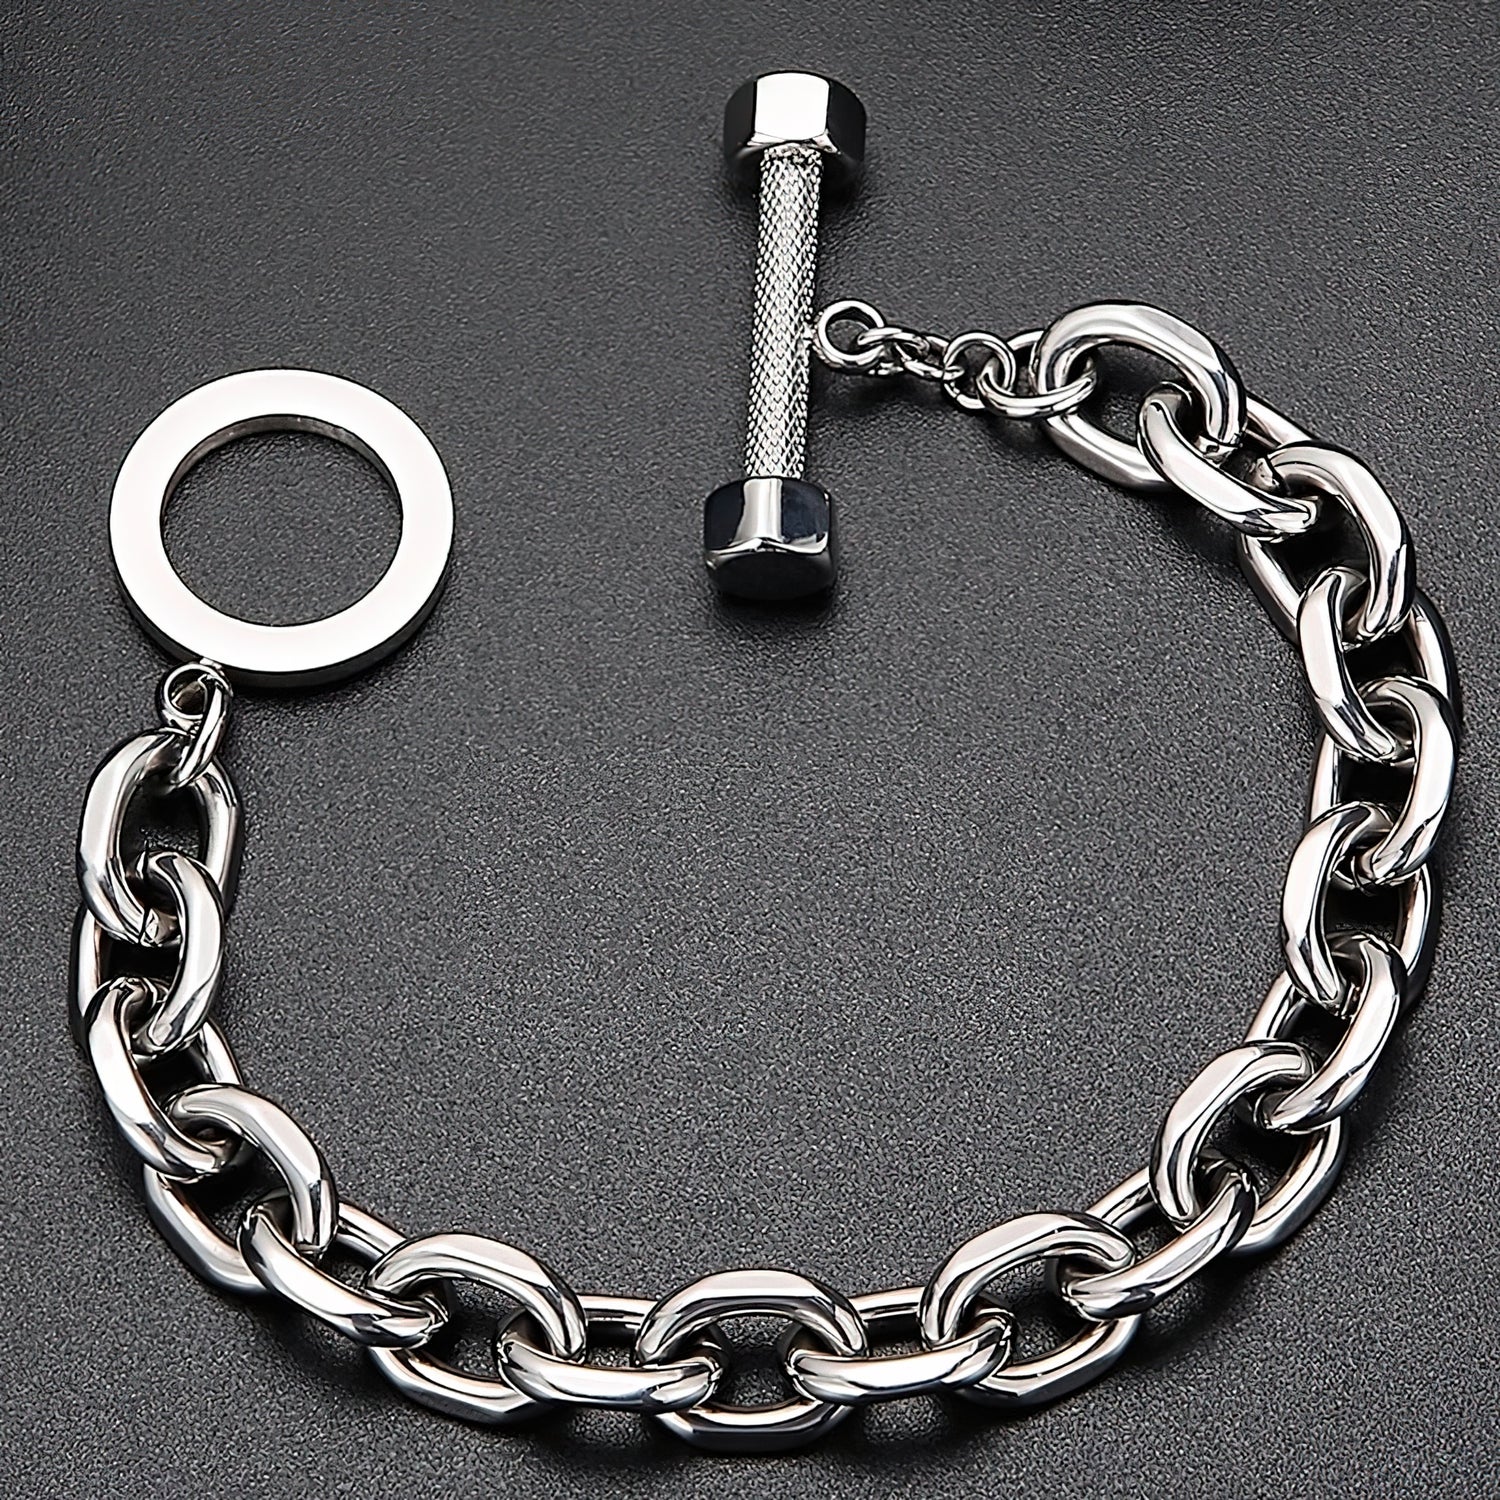 Solid Stainless Steel Chain Wristband